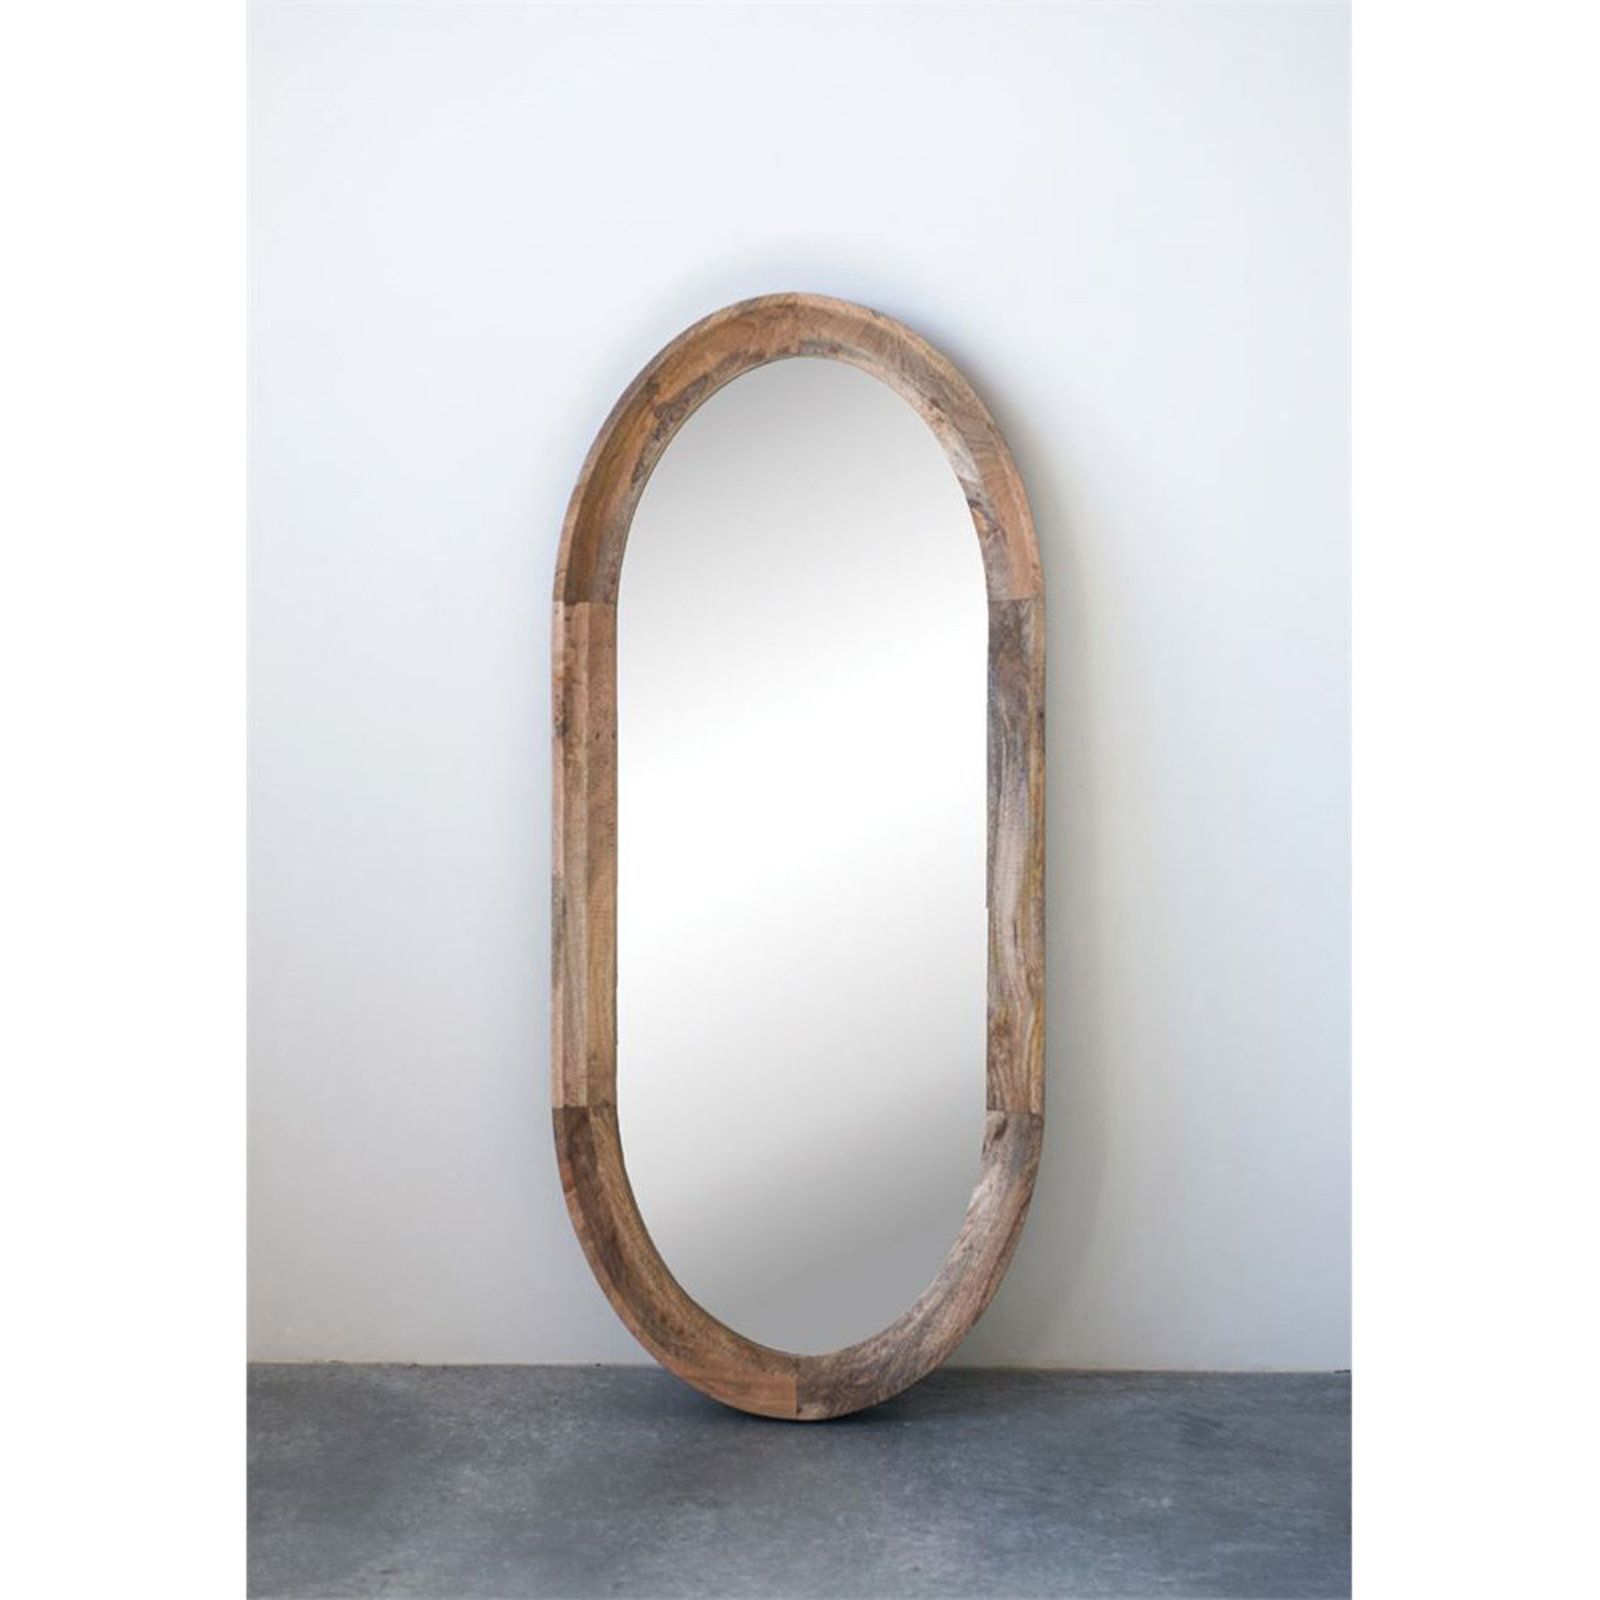 Oval Mango Mirror | Oval Wall Mirror, Brown Wall Mirrors, Mirror Wall Pertaining To Wooden Oval Wall Mirrors (View 4 of 15)